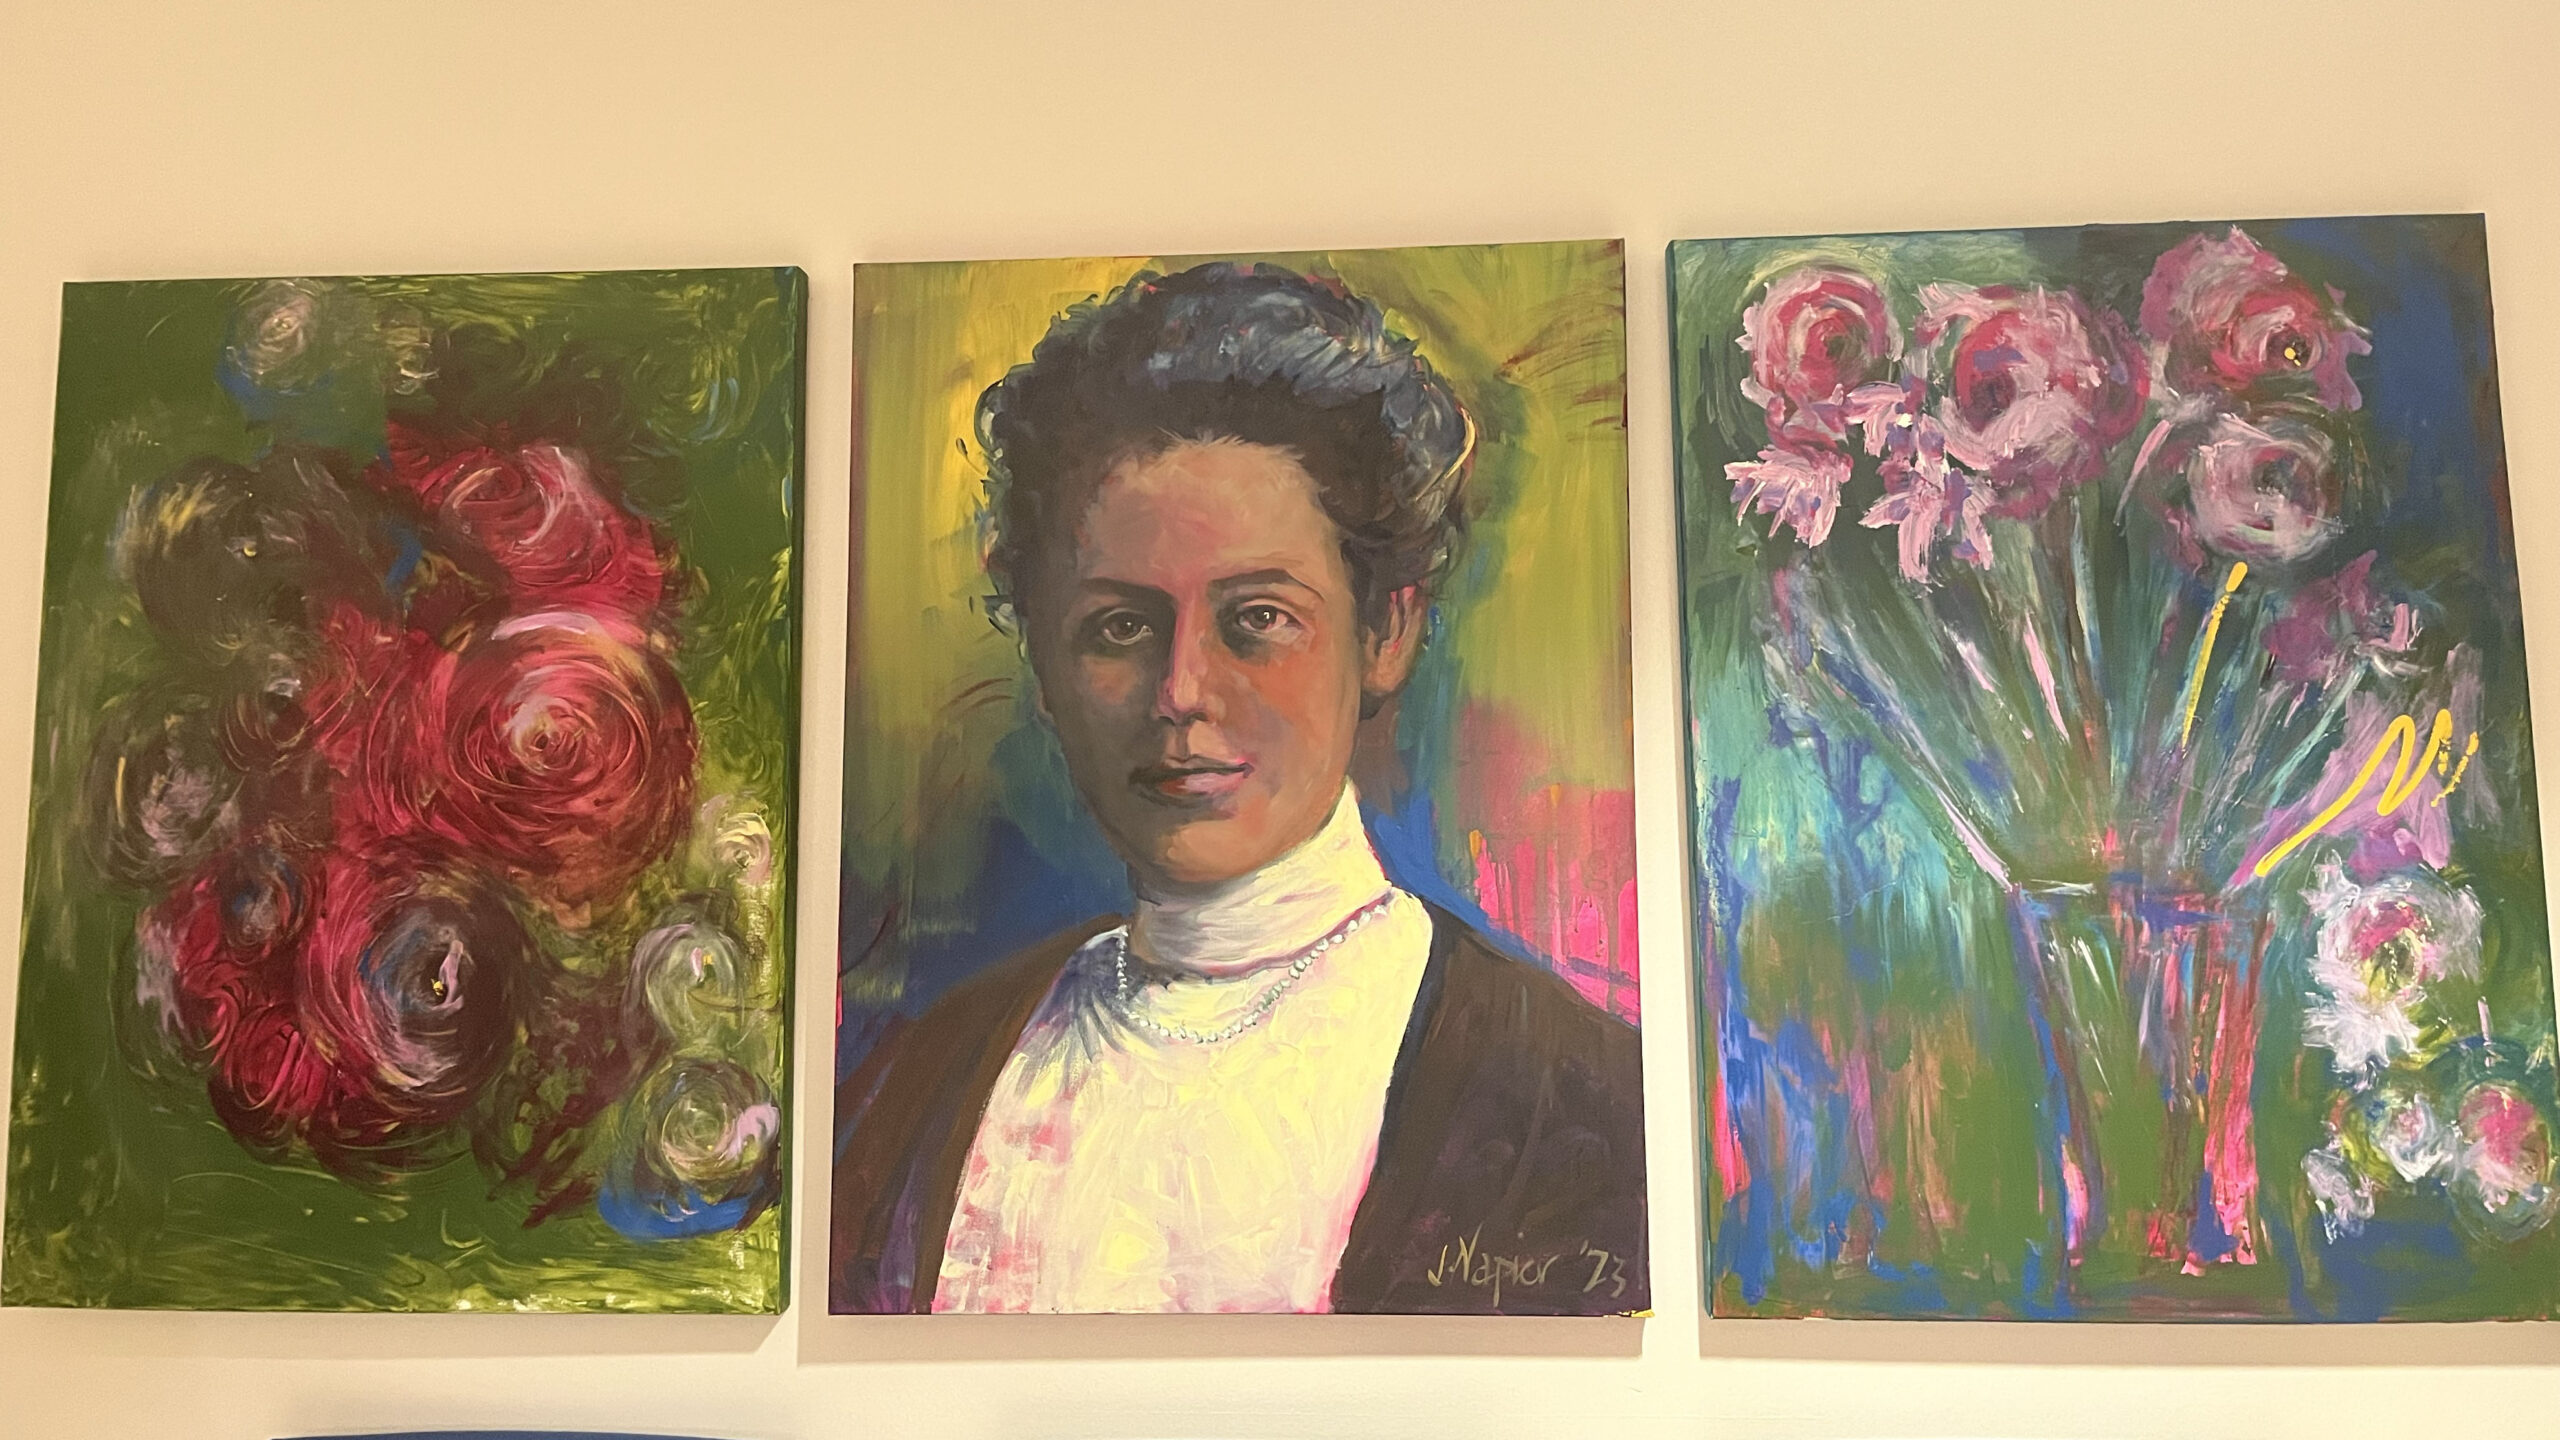 Three portraits are hanging on a wall. The portrait in the middle is of a woman with dark hair, wearing pearls. The other two are of flowers that are red and pink.